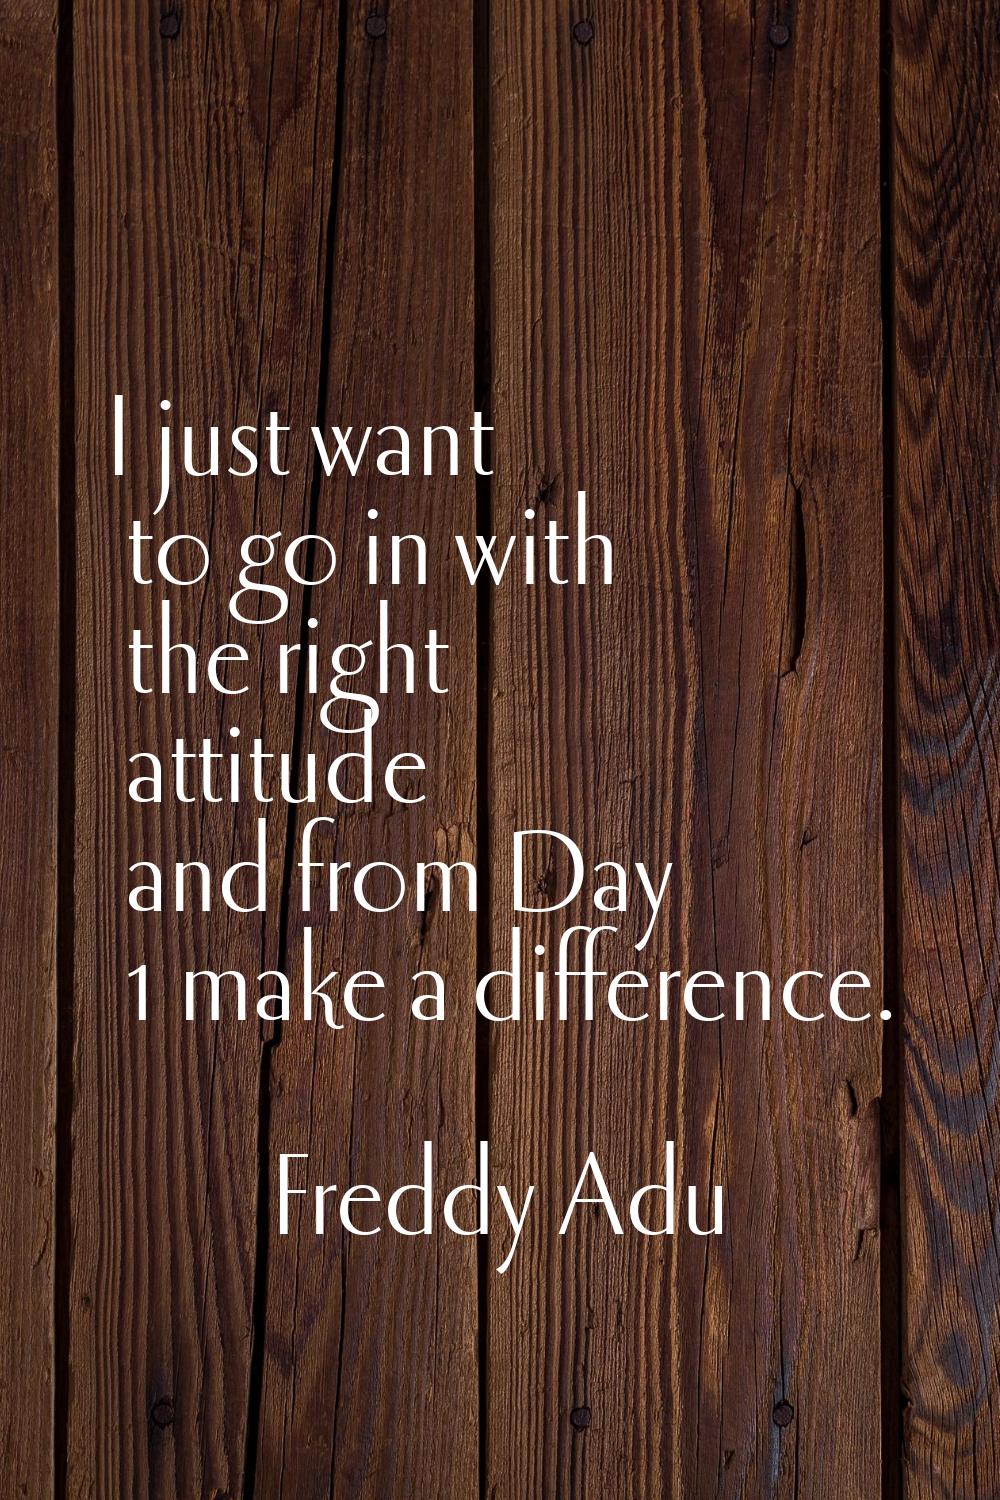 I just want to go in with the right attitude and from Day 1 make a difference.